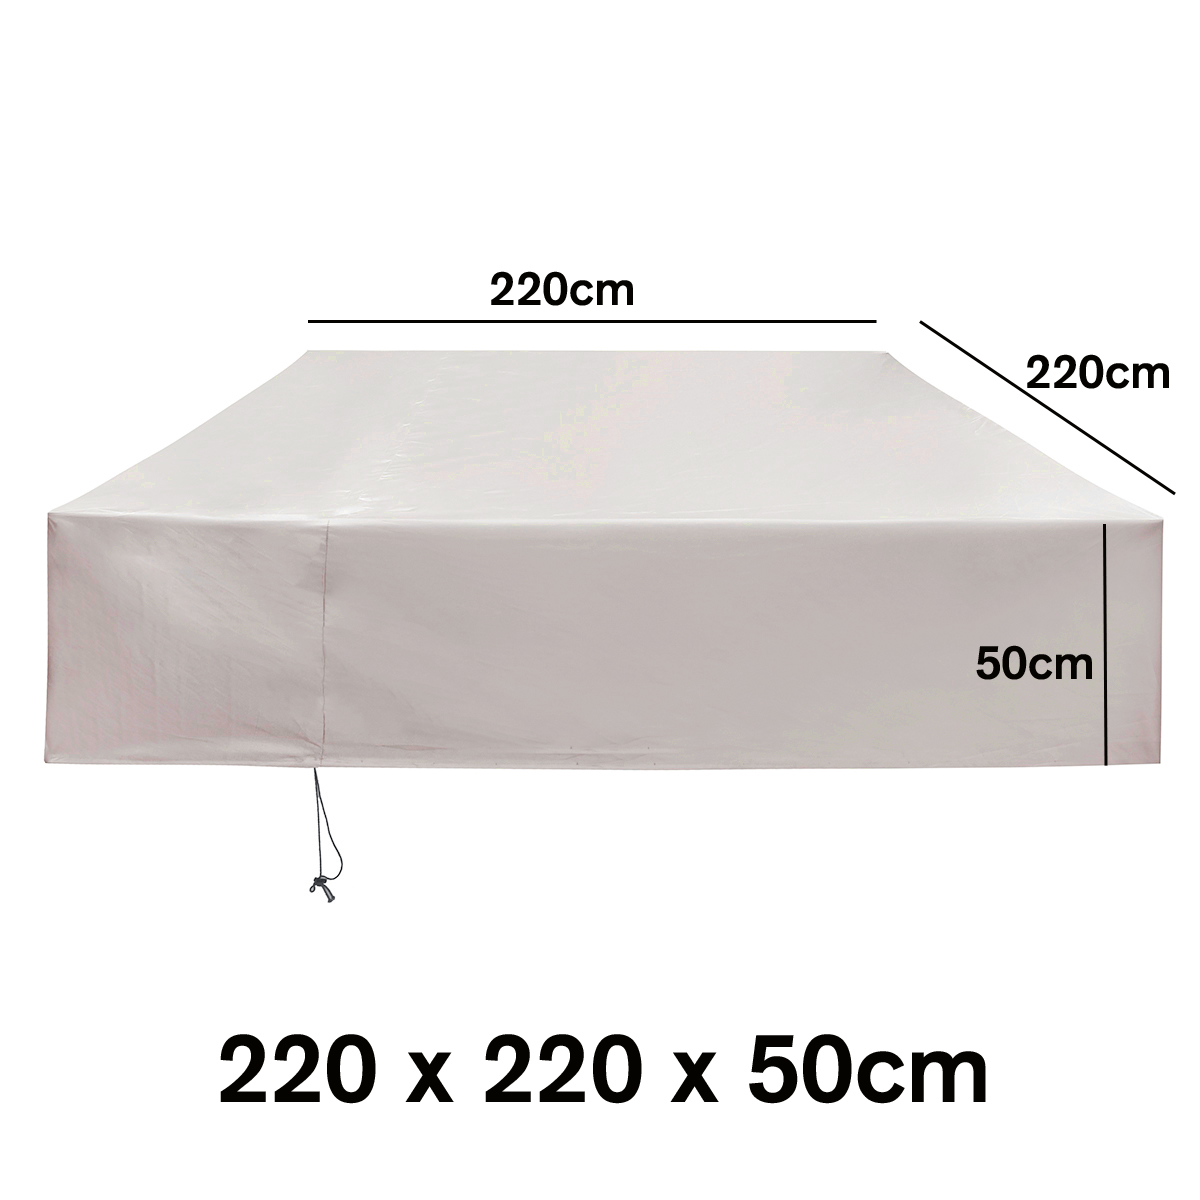 250240220CM-Outdoors-Spa-Hot-Tub-Cover-Waterproof-Furniture-Garden-Protector-1636533-7